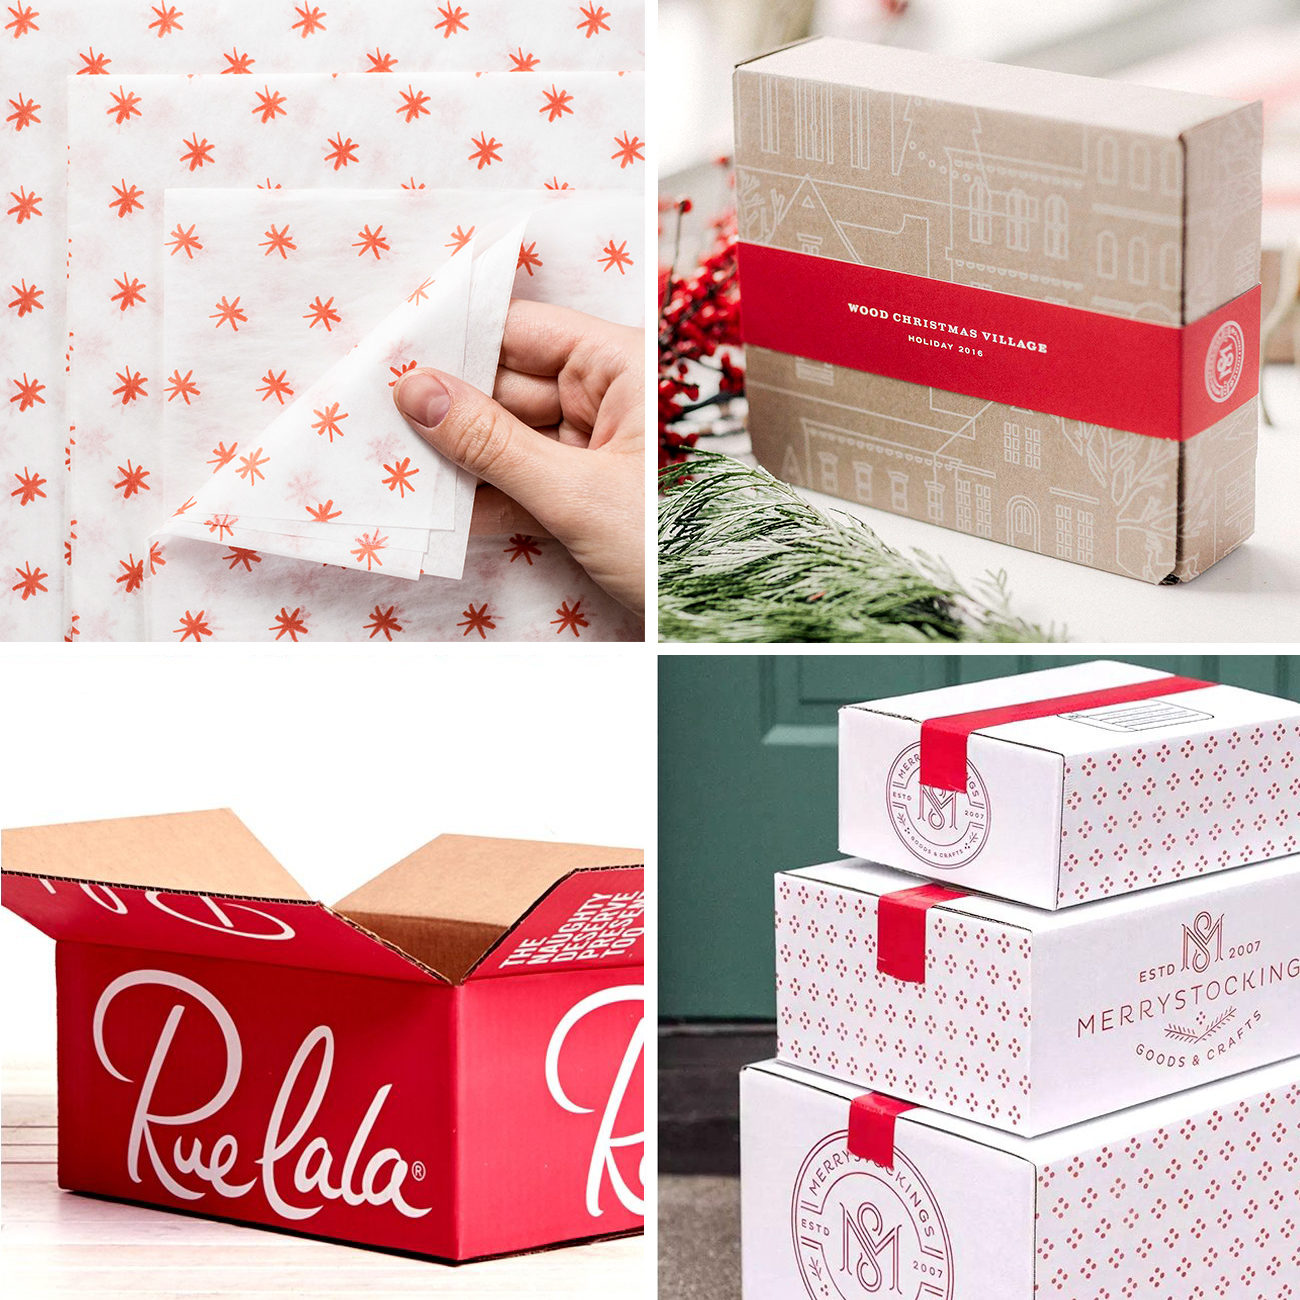 Photos via: Page Three Hundred, Lumi, Studio MLPS, Cassouki 90 Ideas to Spruce Up Your Holiday Packaging Design